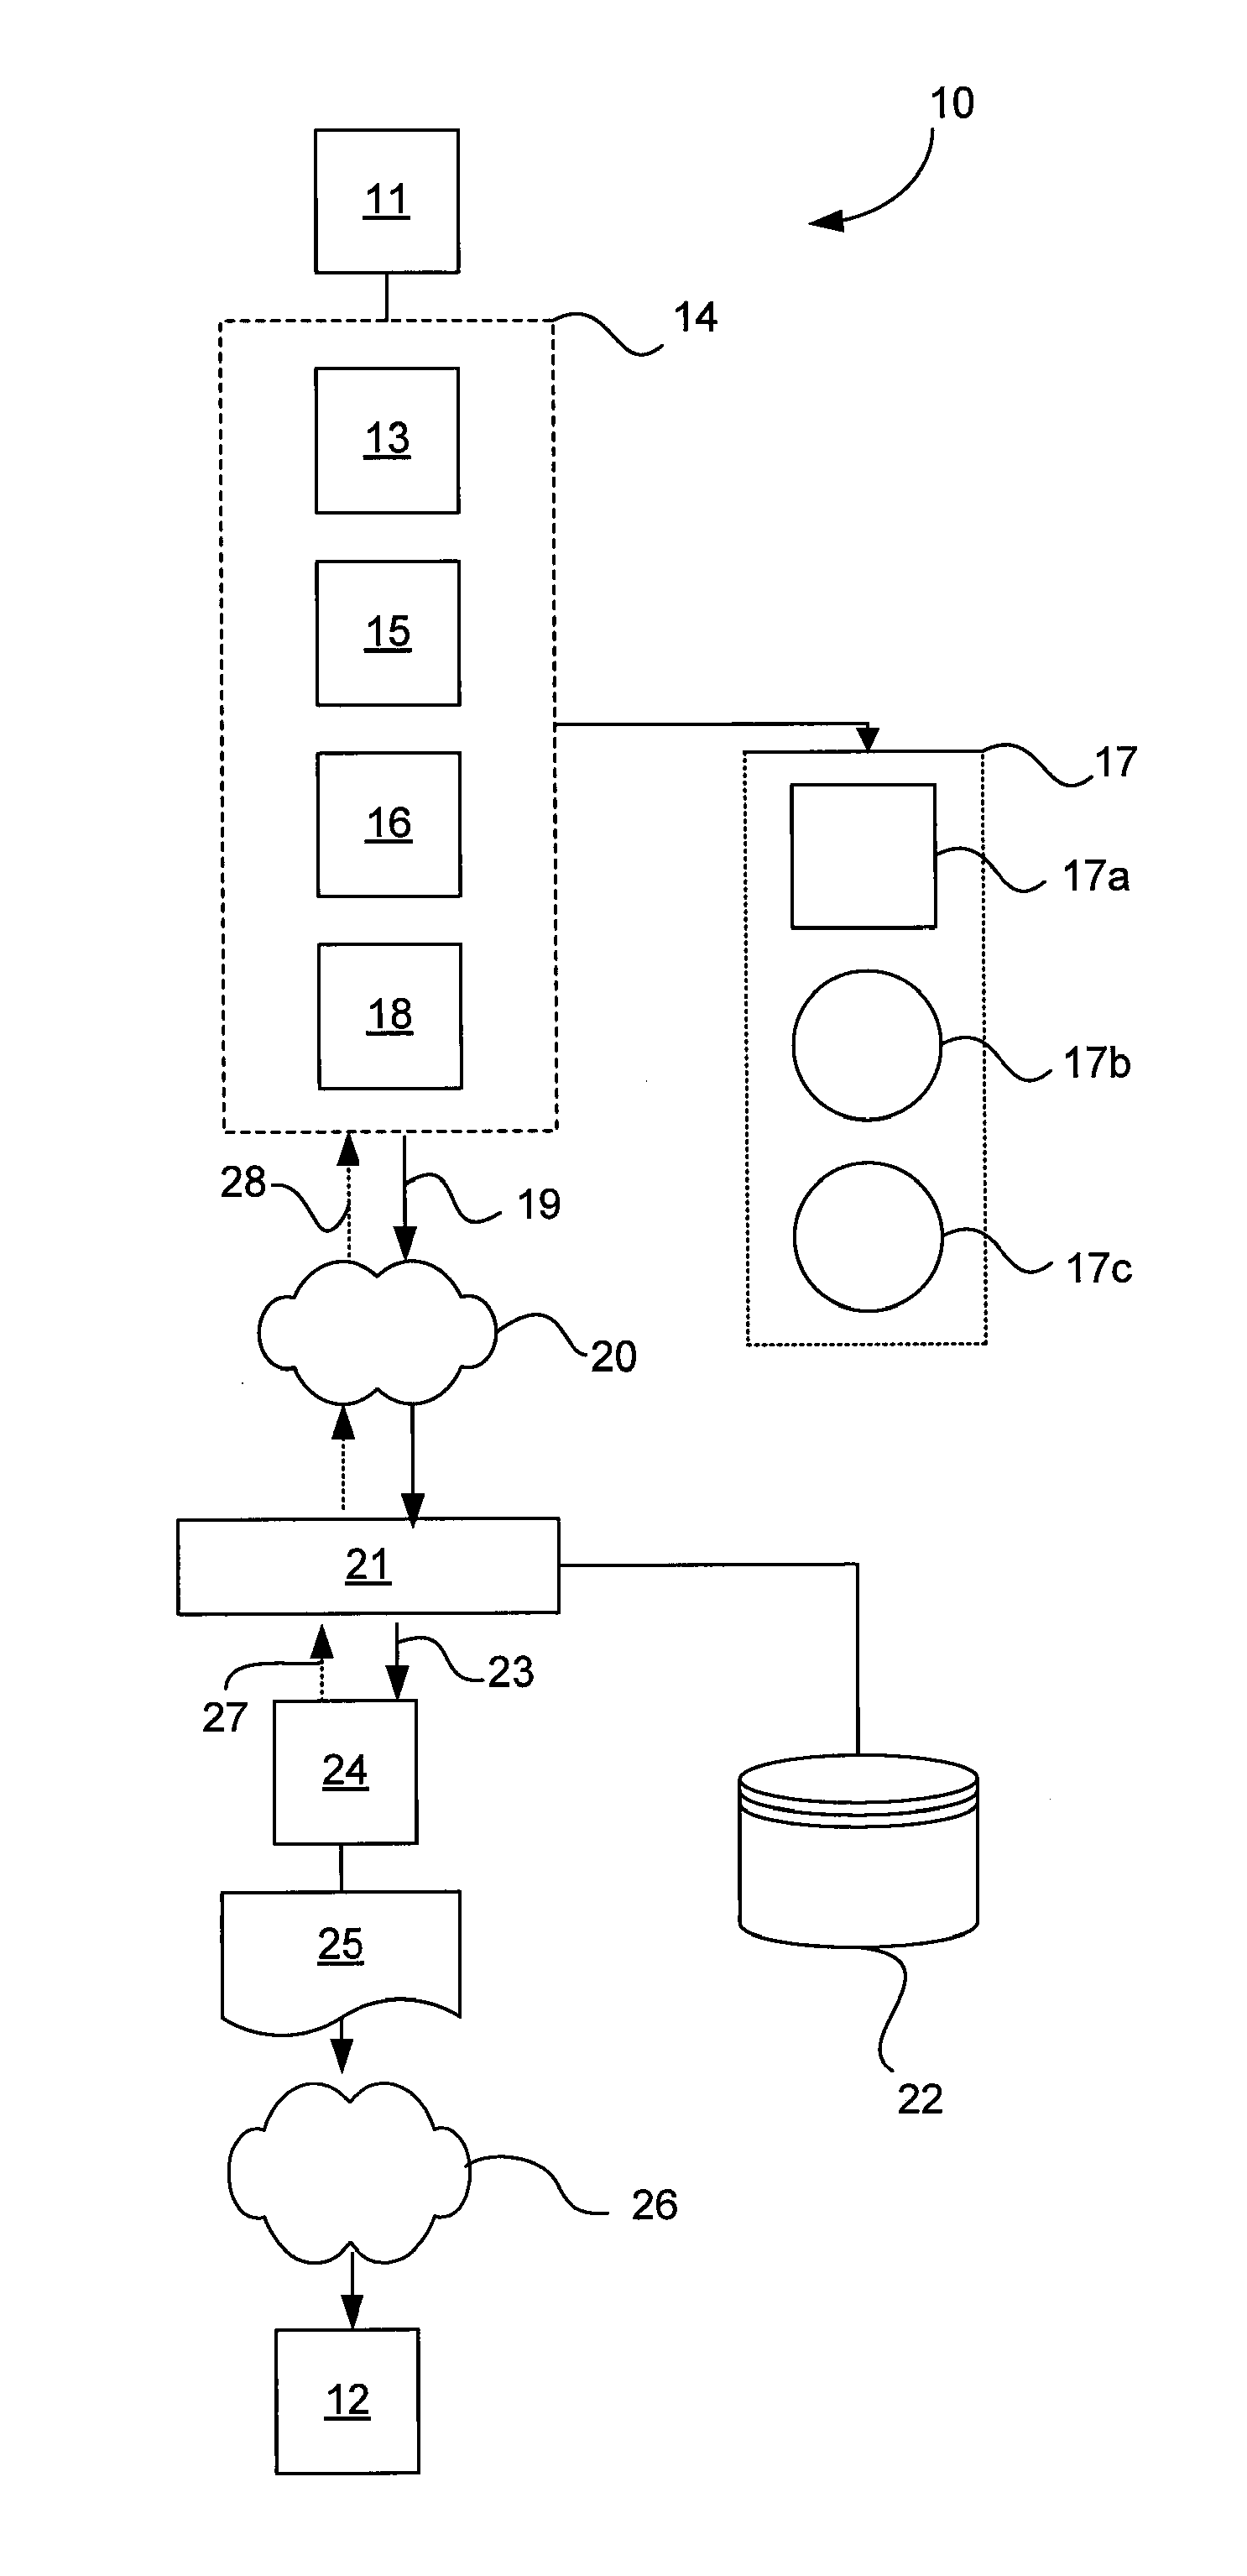 CONSOLIDATION OF APPLICATION DOCUMENTS FOR ELECTRONIC SUBMISSION TO A POSTAL NETWORk